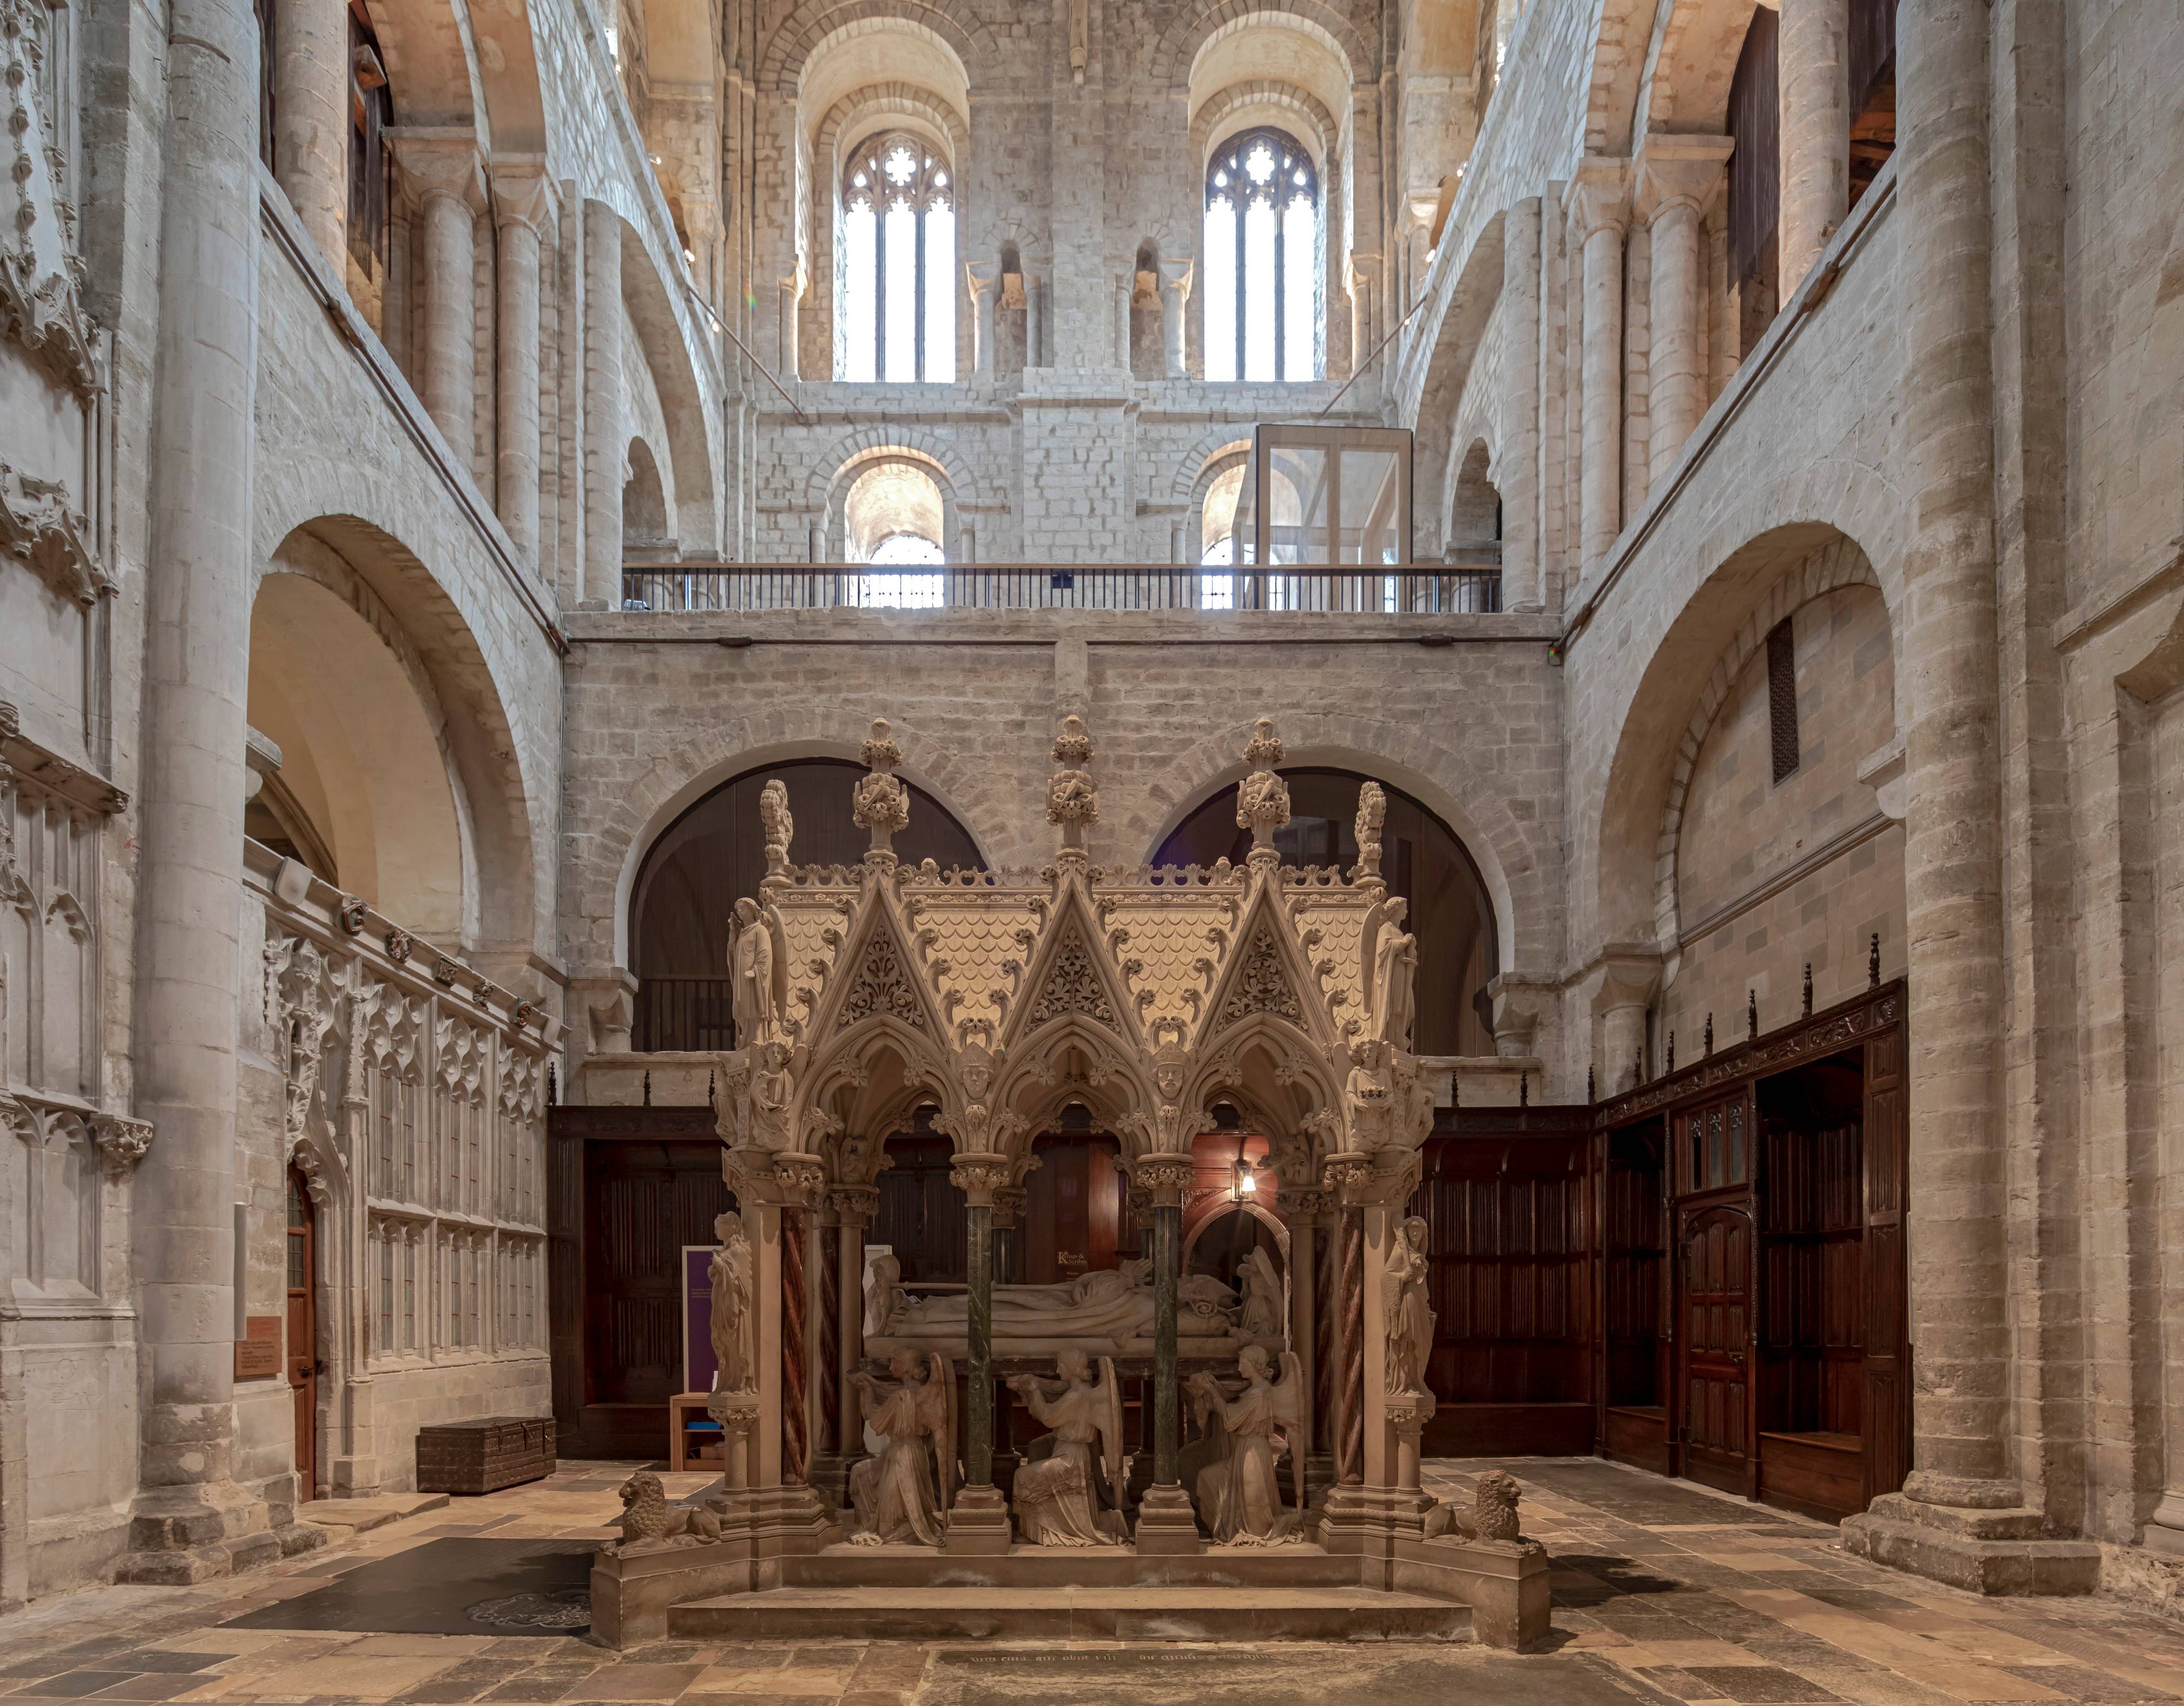 Winchester Cathedral South Transept Exhibition Spaces by Nick Cox Architects with Metaphor Metaphor. Photo: Peter Cook